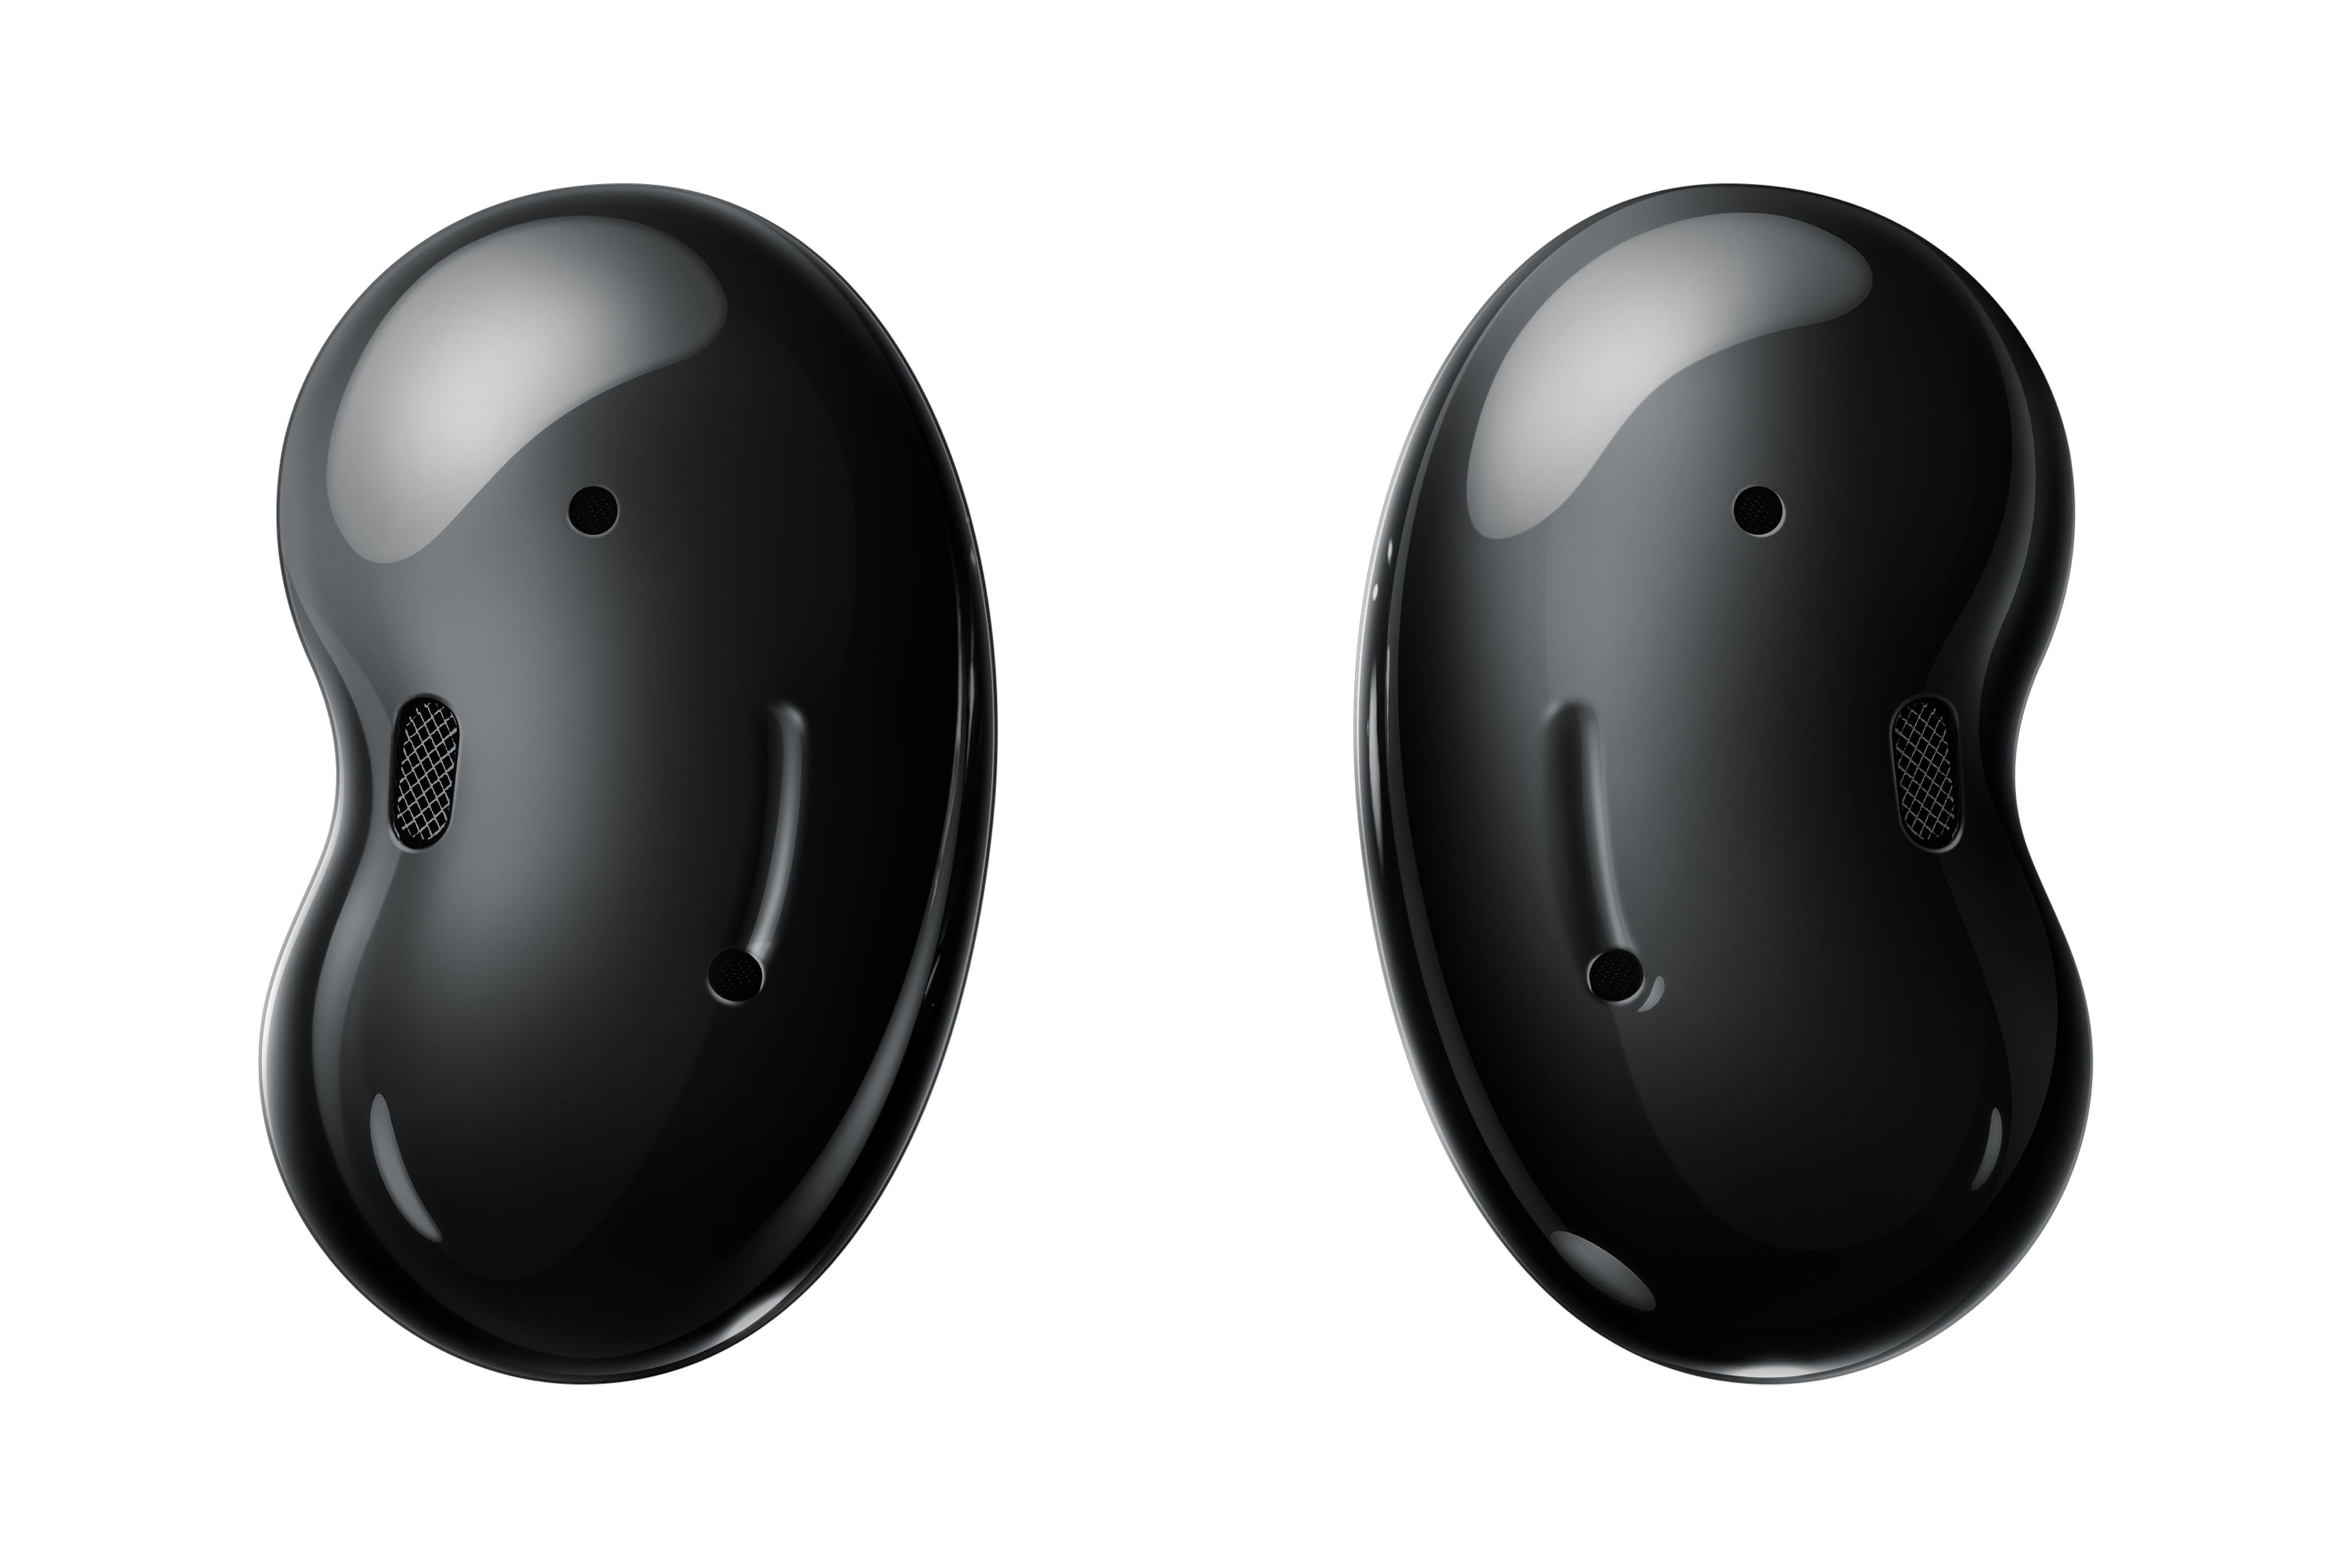 Samsung Galaxy Buds Live Bluetooth Earbuds, Noise Canceling and True Wireless, Onyx Black - image 3 of 12